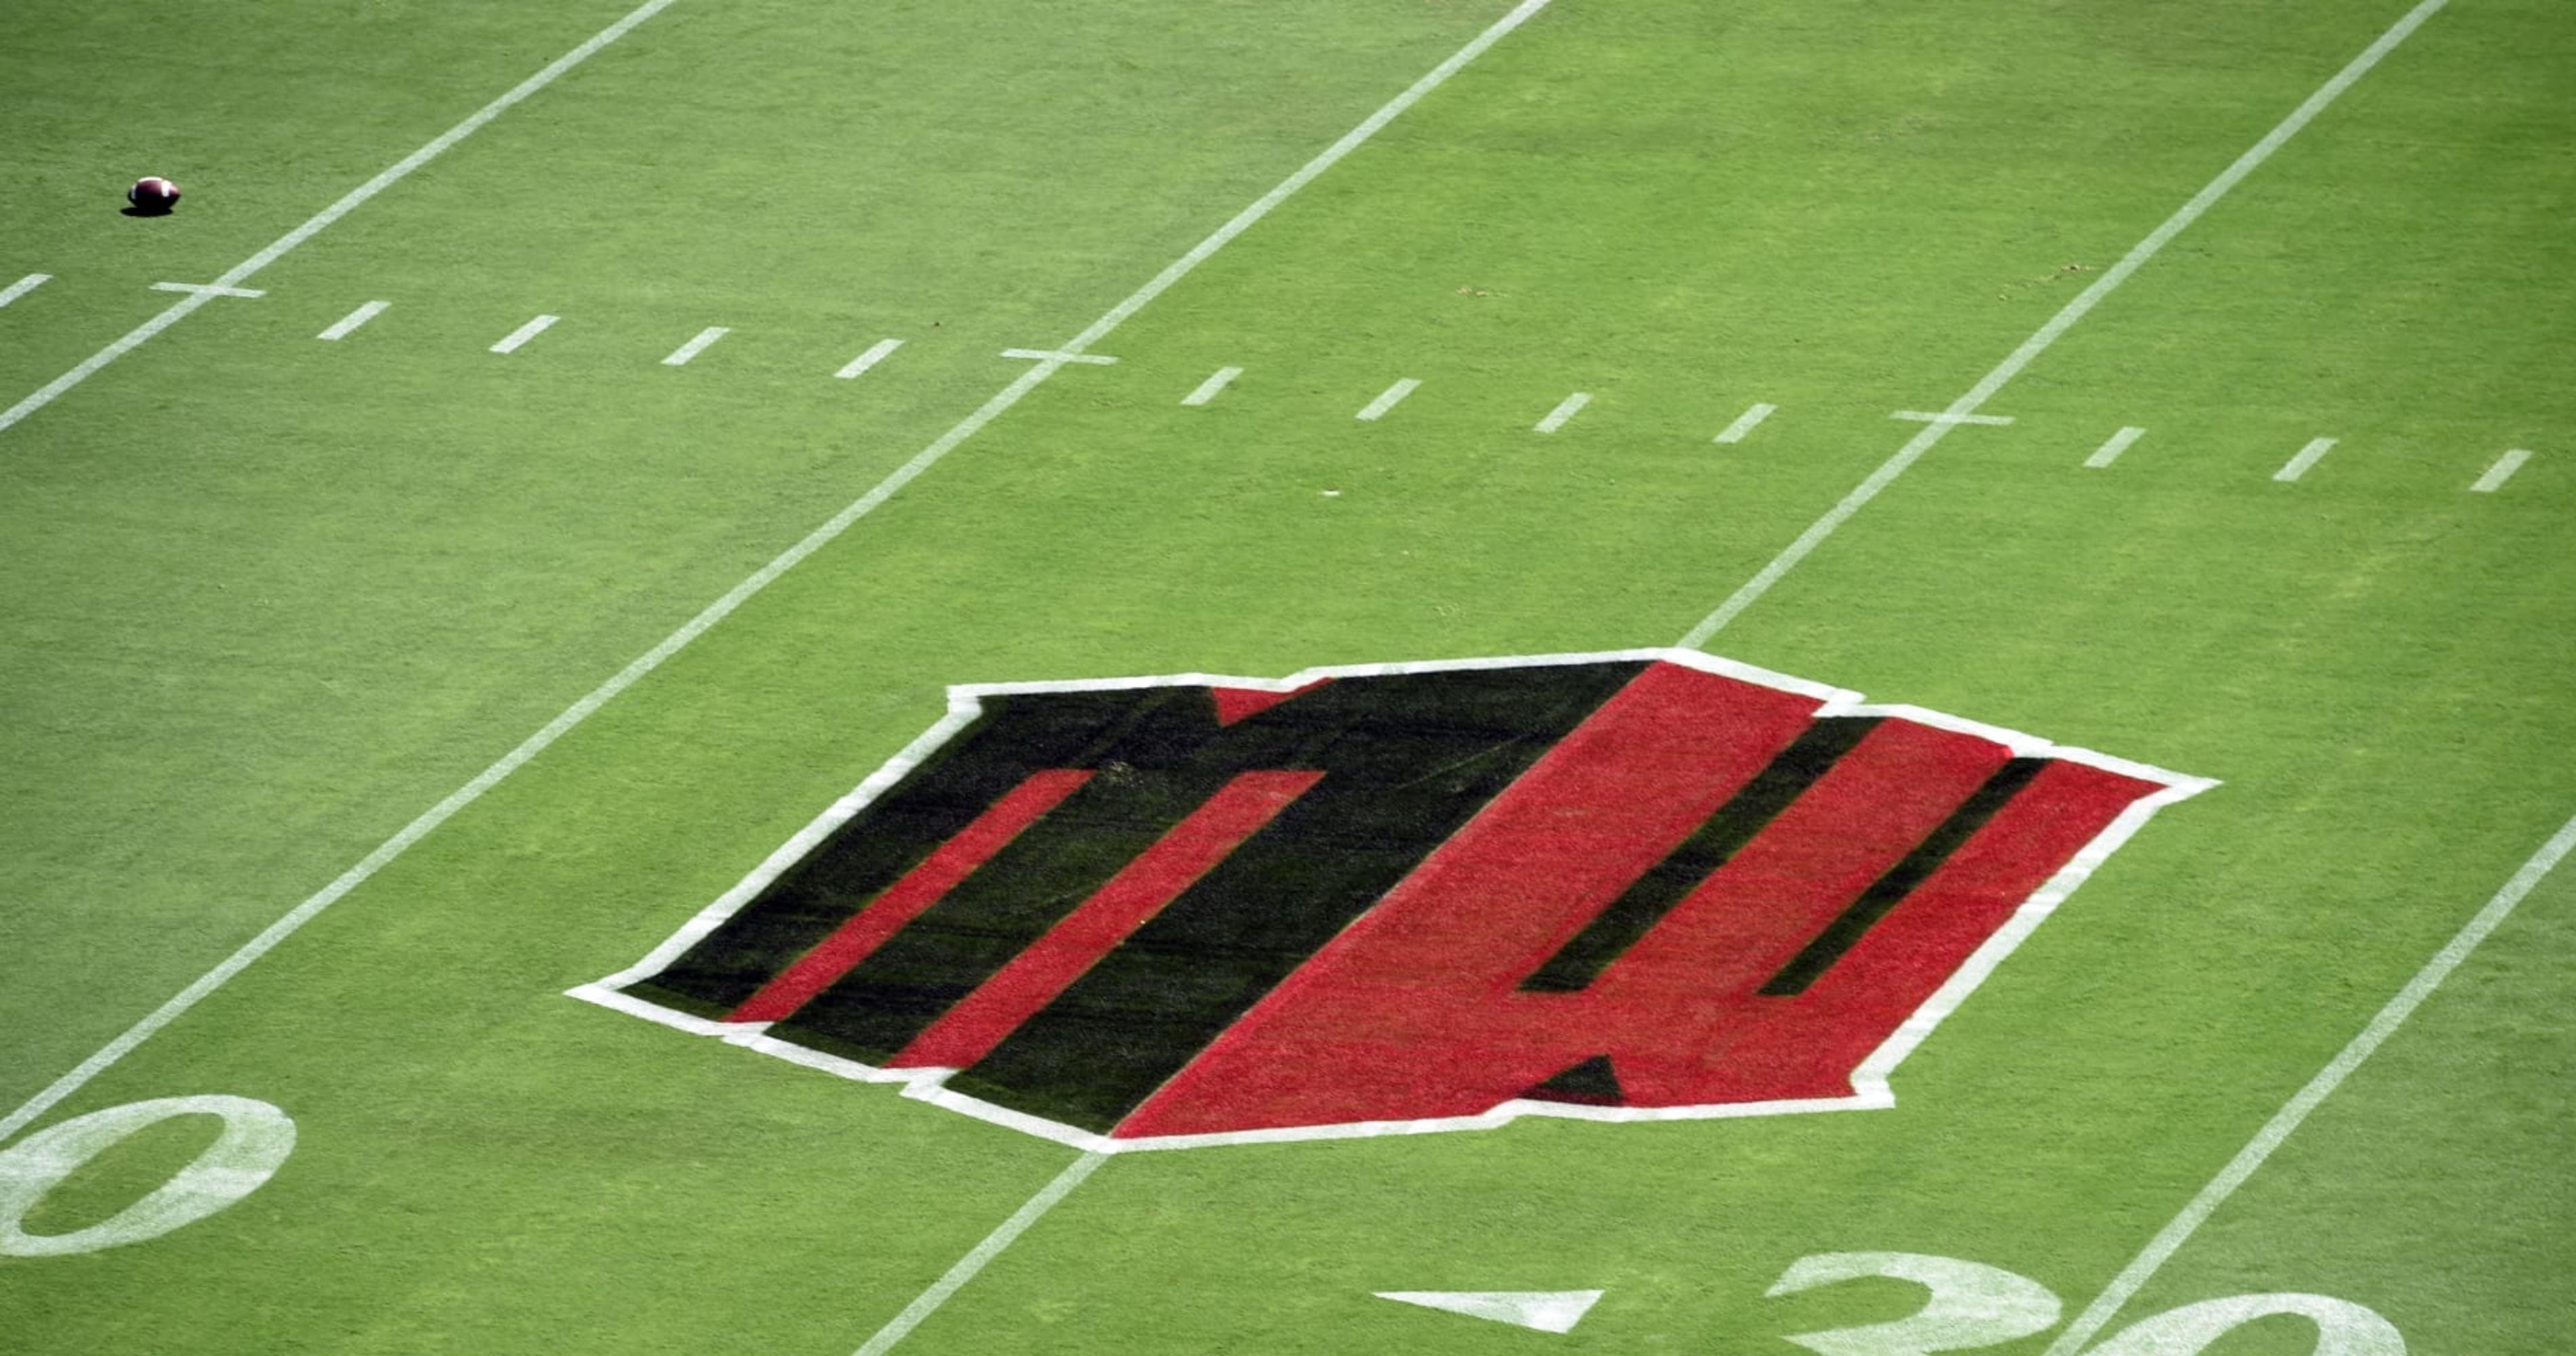 Report: Oregon State, WSU Expected to Join MWC If Cal, Stanford Go from Pac-12 to ACC